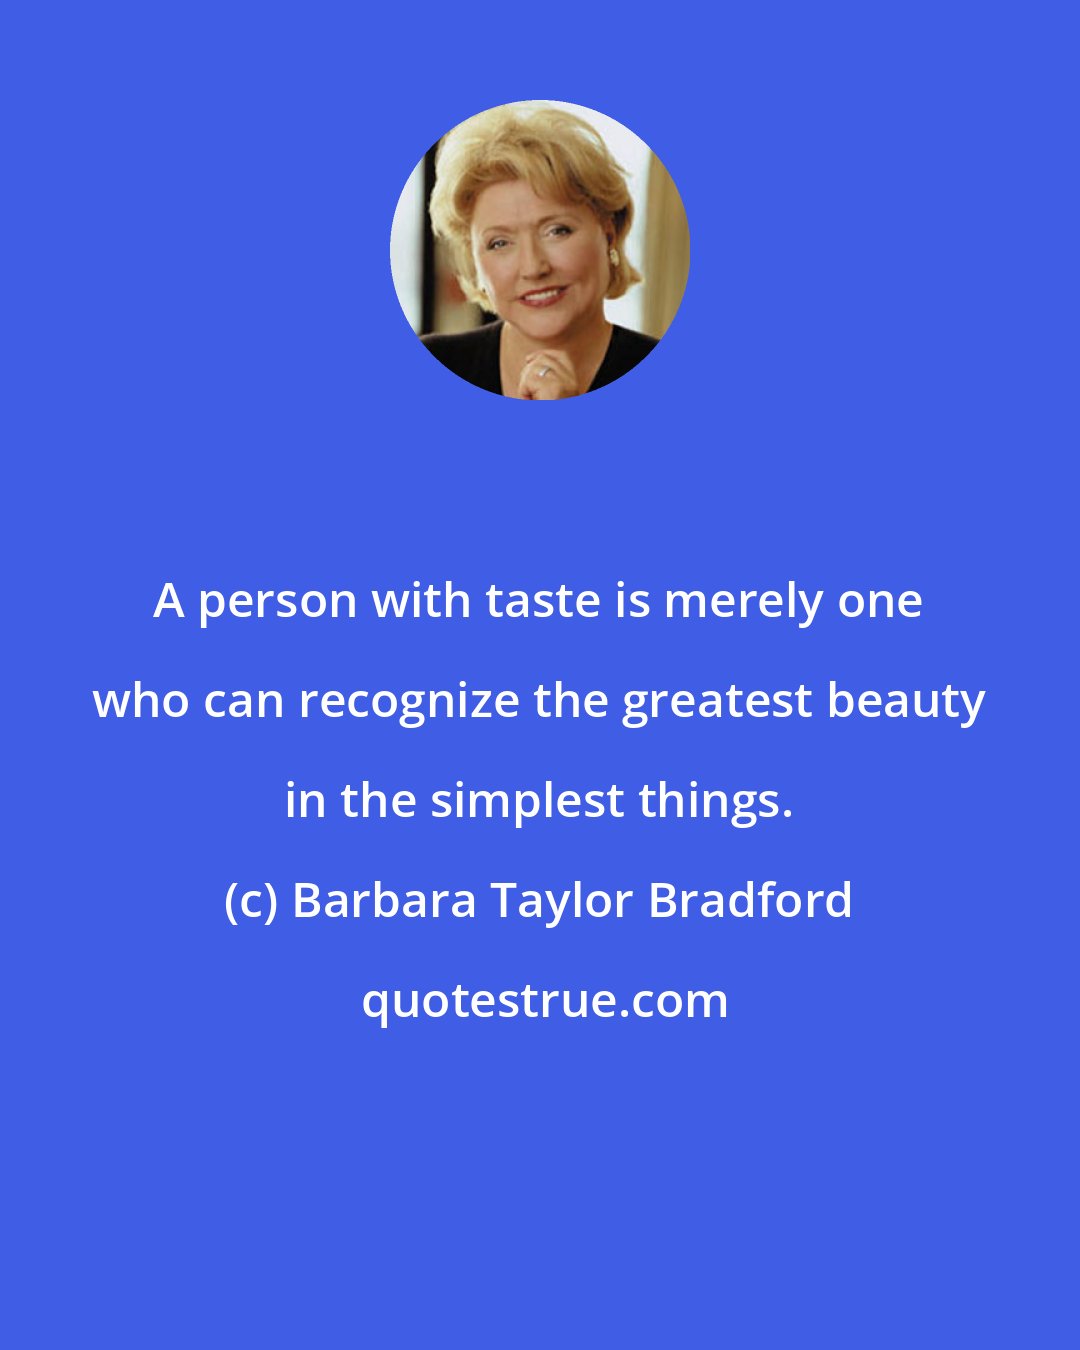 Barbara Taylor Bradford: A person with taste is merely one who can recognize the greatest beauty in the simplest things.